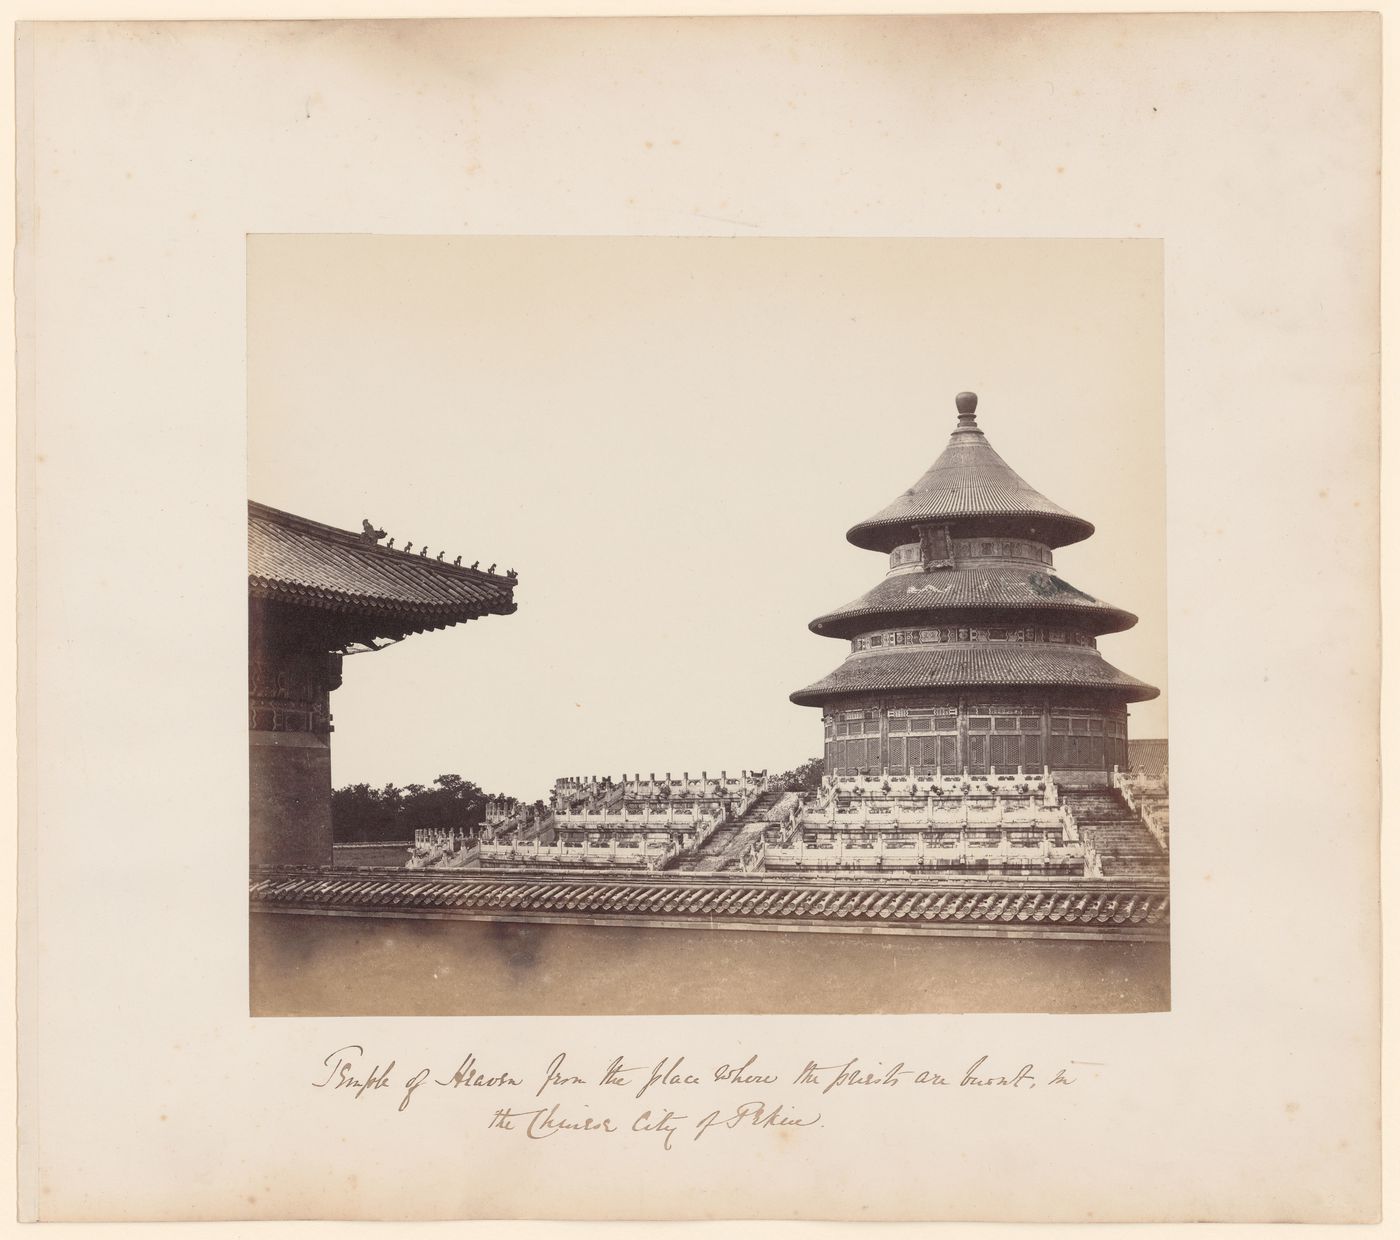 View of the Hall of Prayer for a Good Harvest [Qinian Dian], Temple of Heaven [Tian Tan], Peking (now Beijing), China